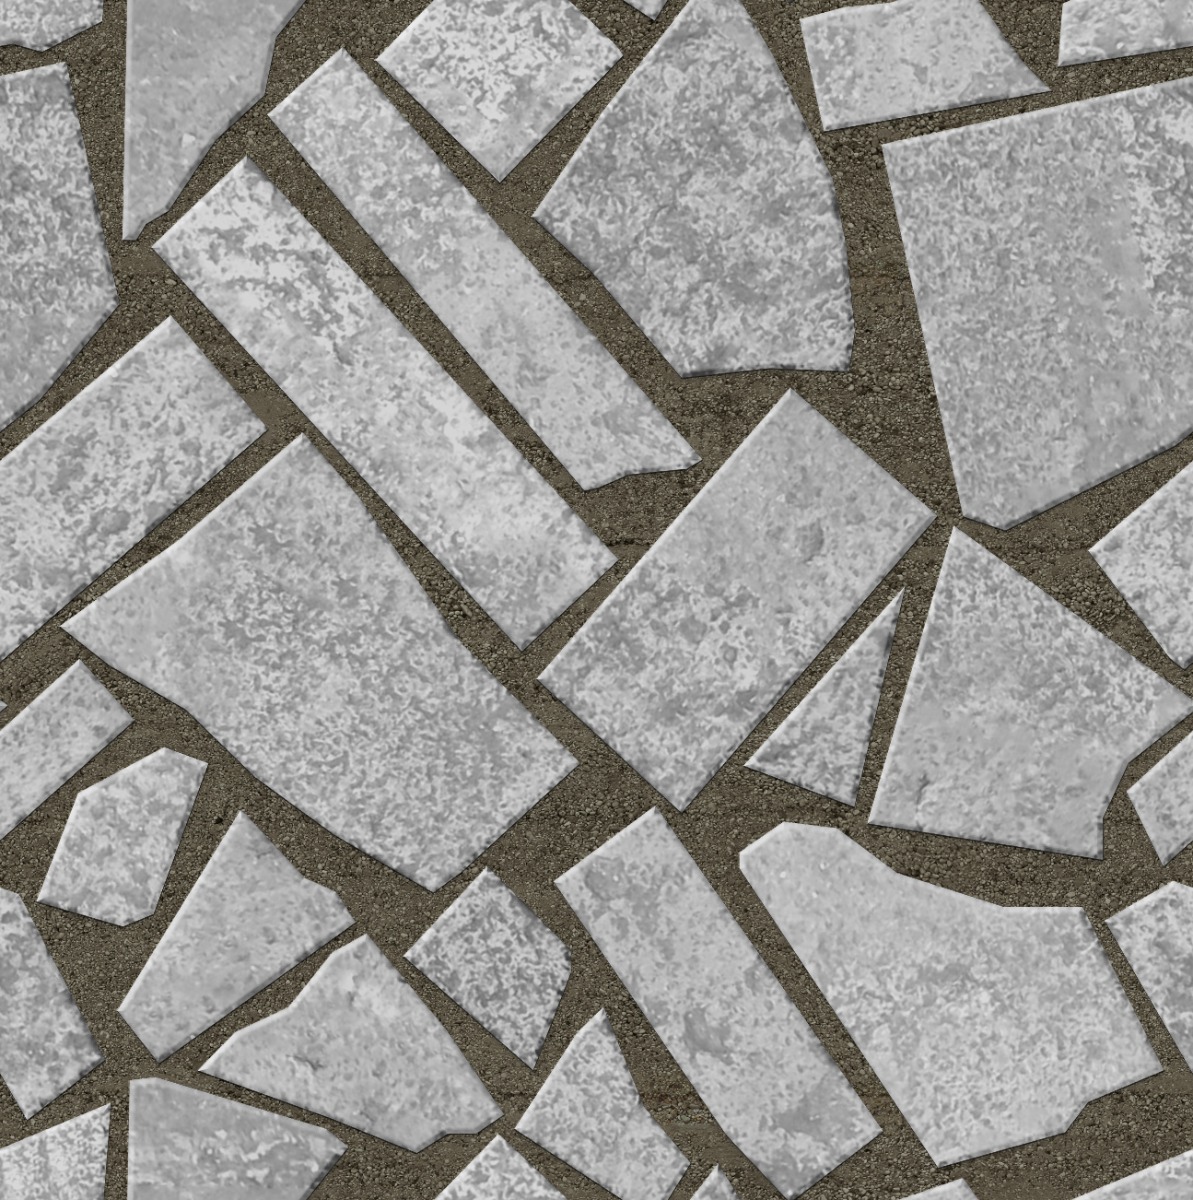 A seamless stone texture with flagstone blocks arranged in a Ionian pattern